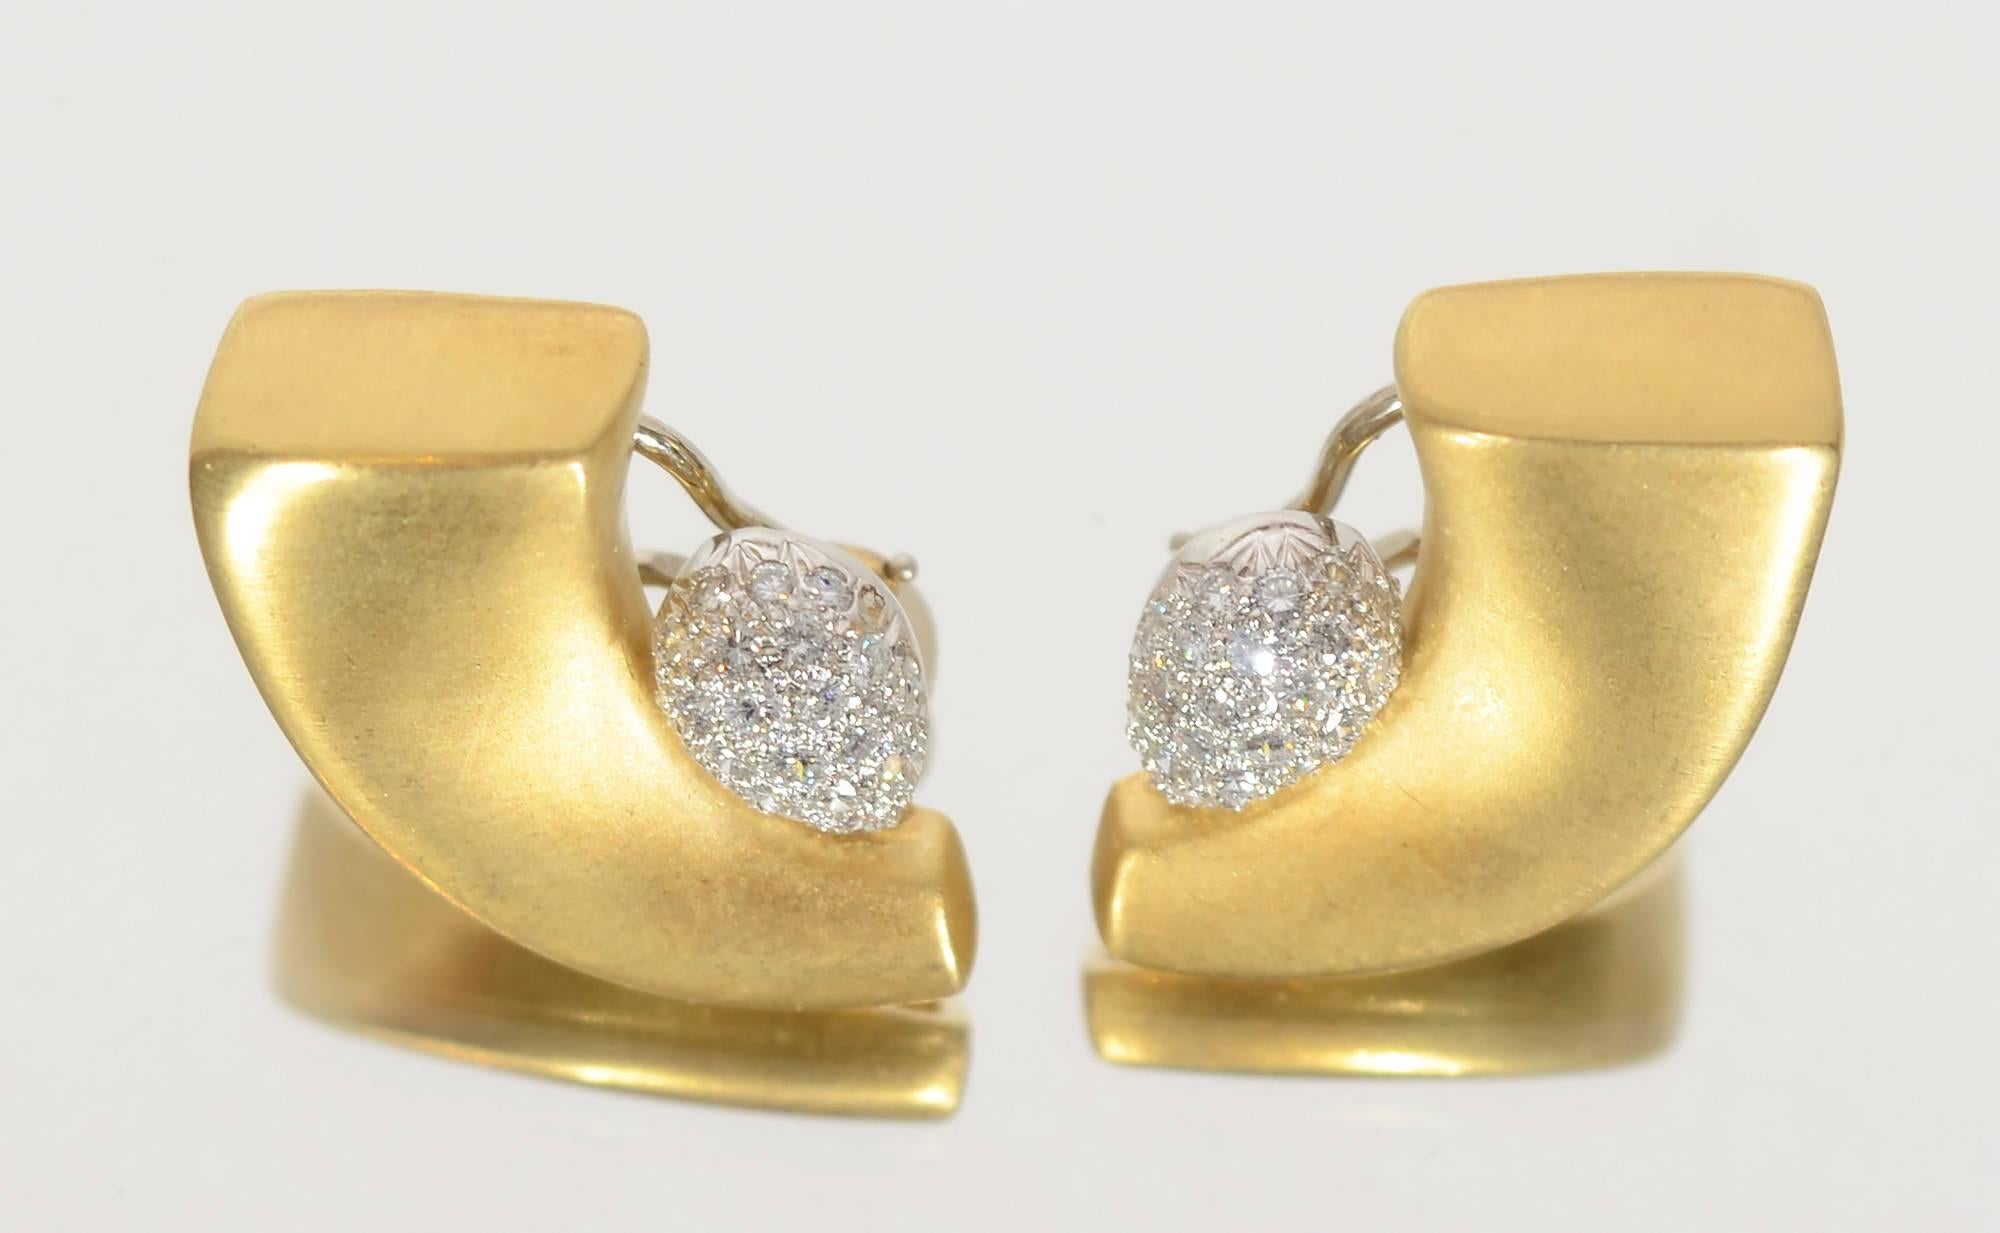 Contemporary Marlene Stowe Crescent Earrings with Pave Diamonds For Sale